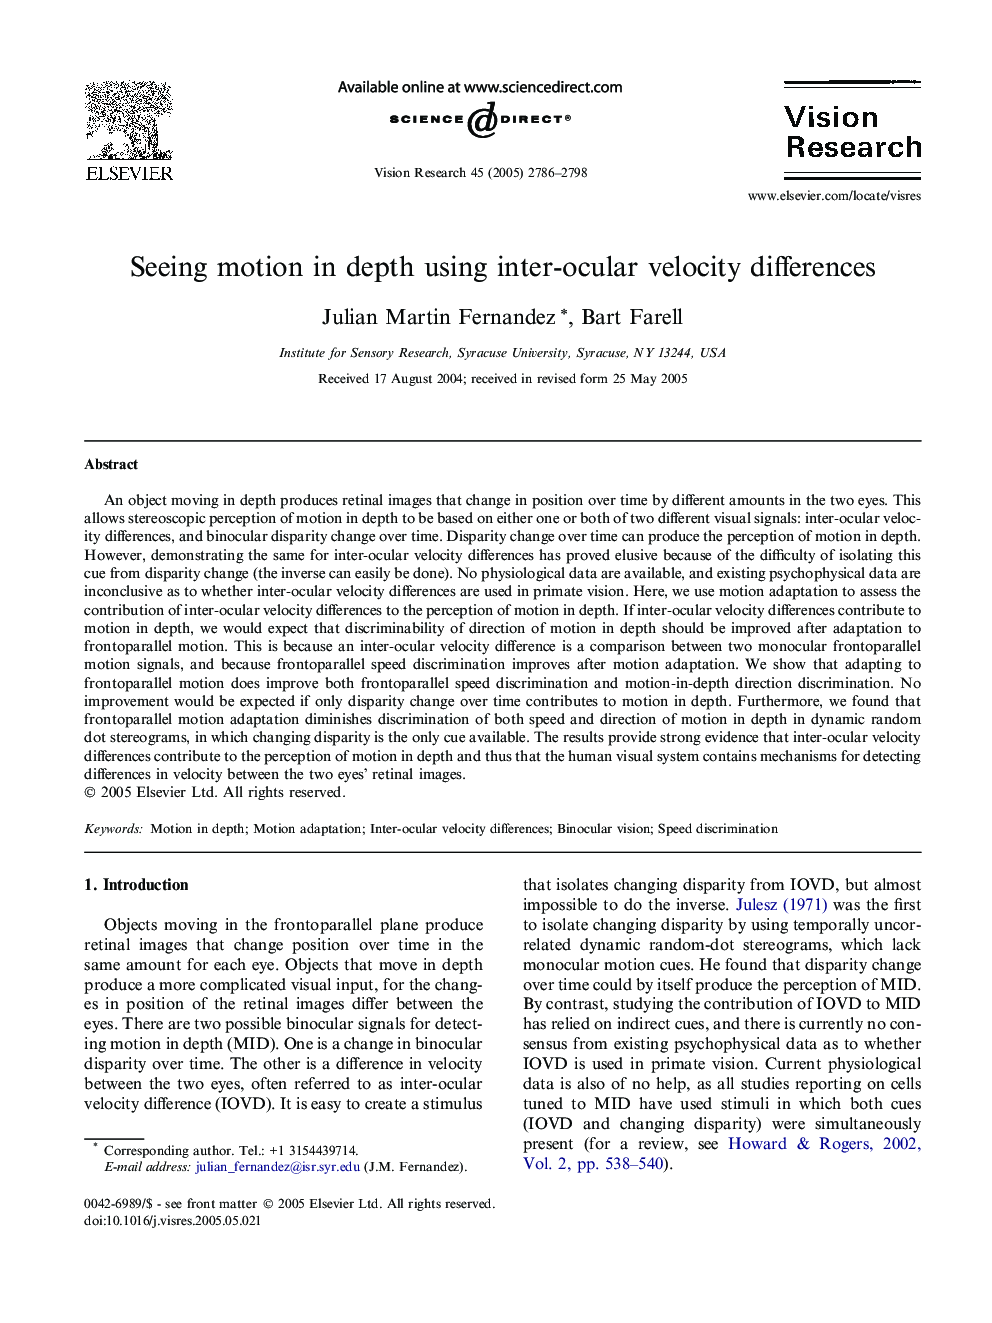 Seeing motion in depth using inter-ocular velocity differences